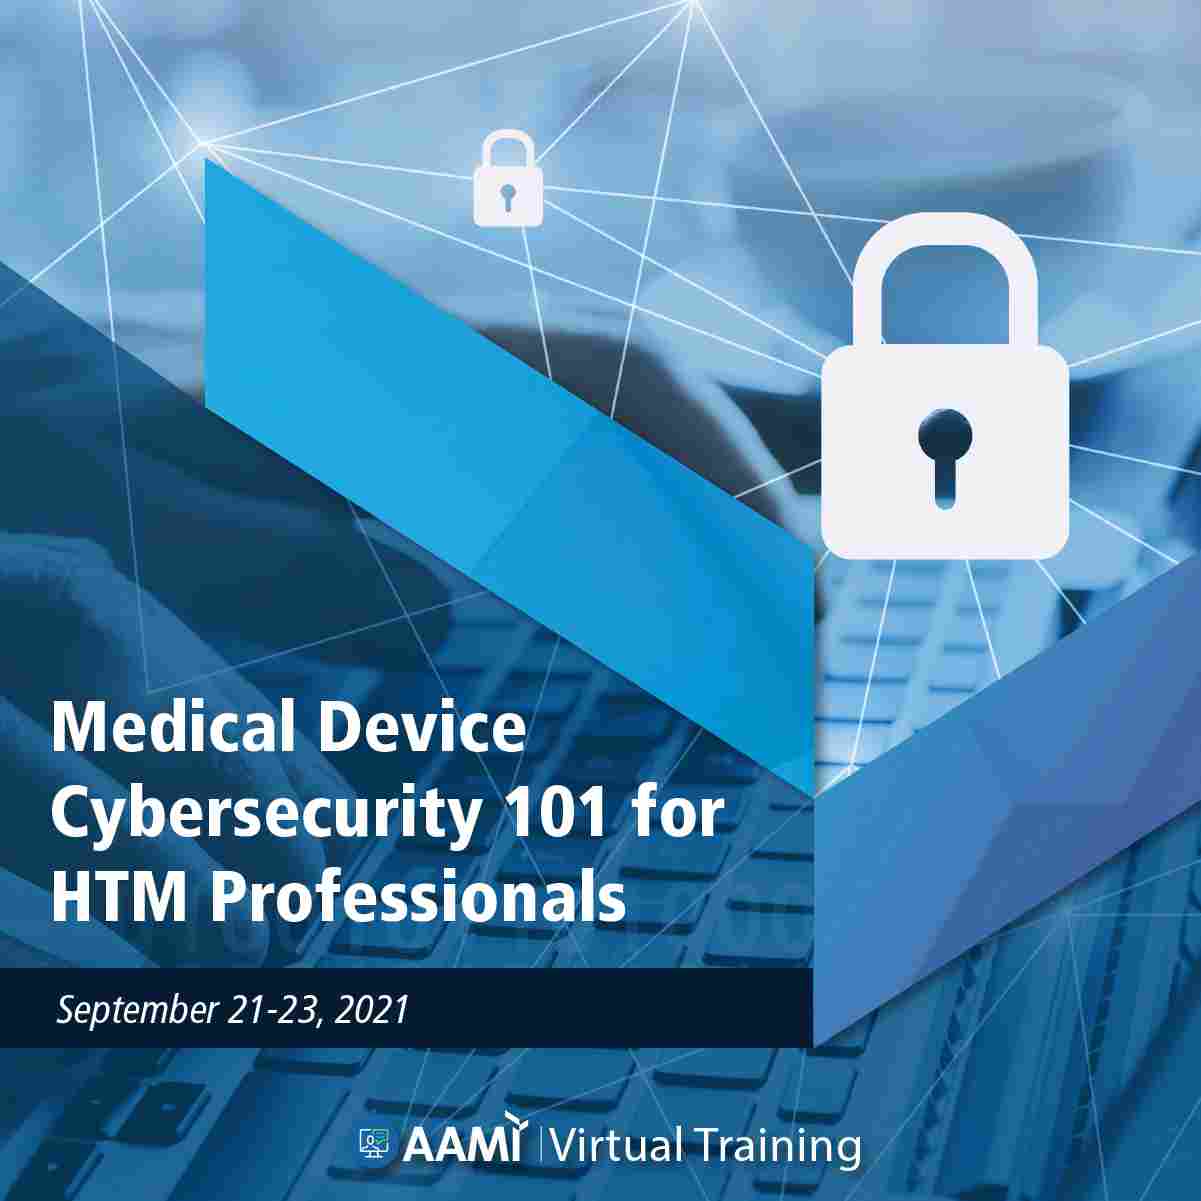 Medical Device Cybersecurity 101 for HTM Professionals